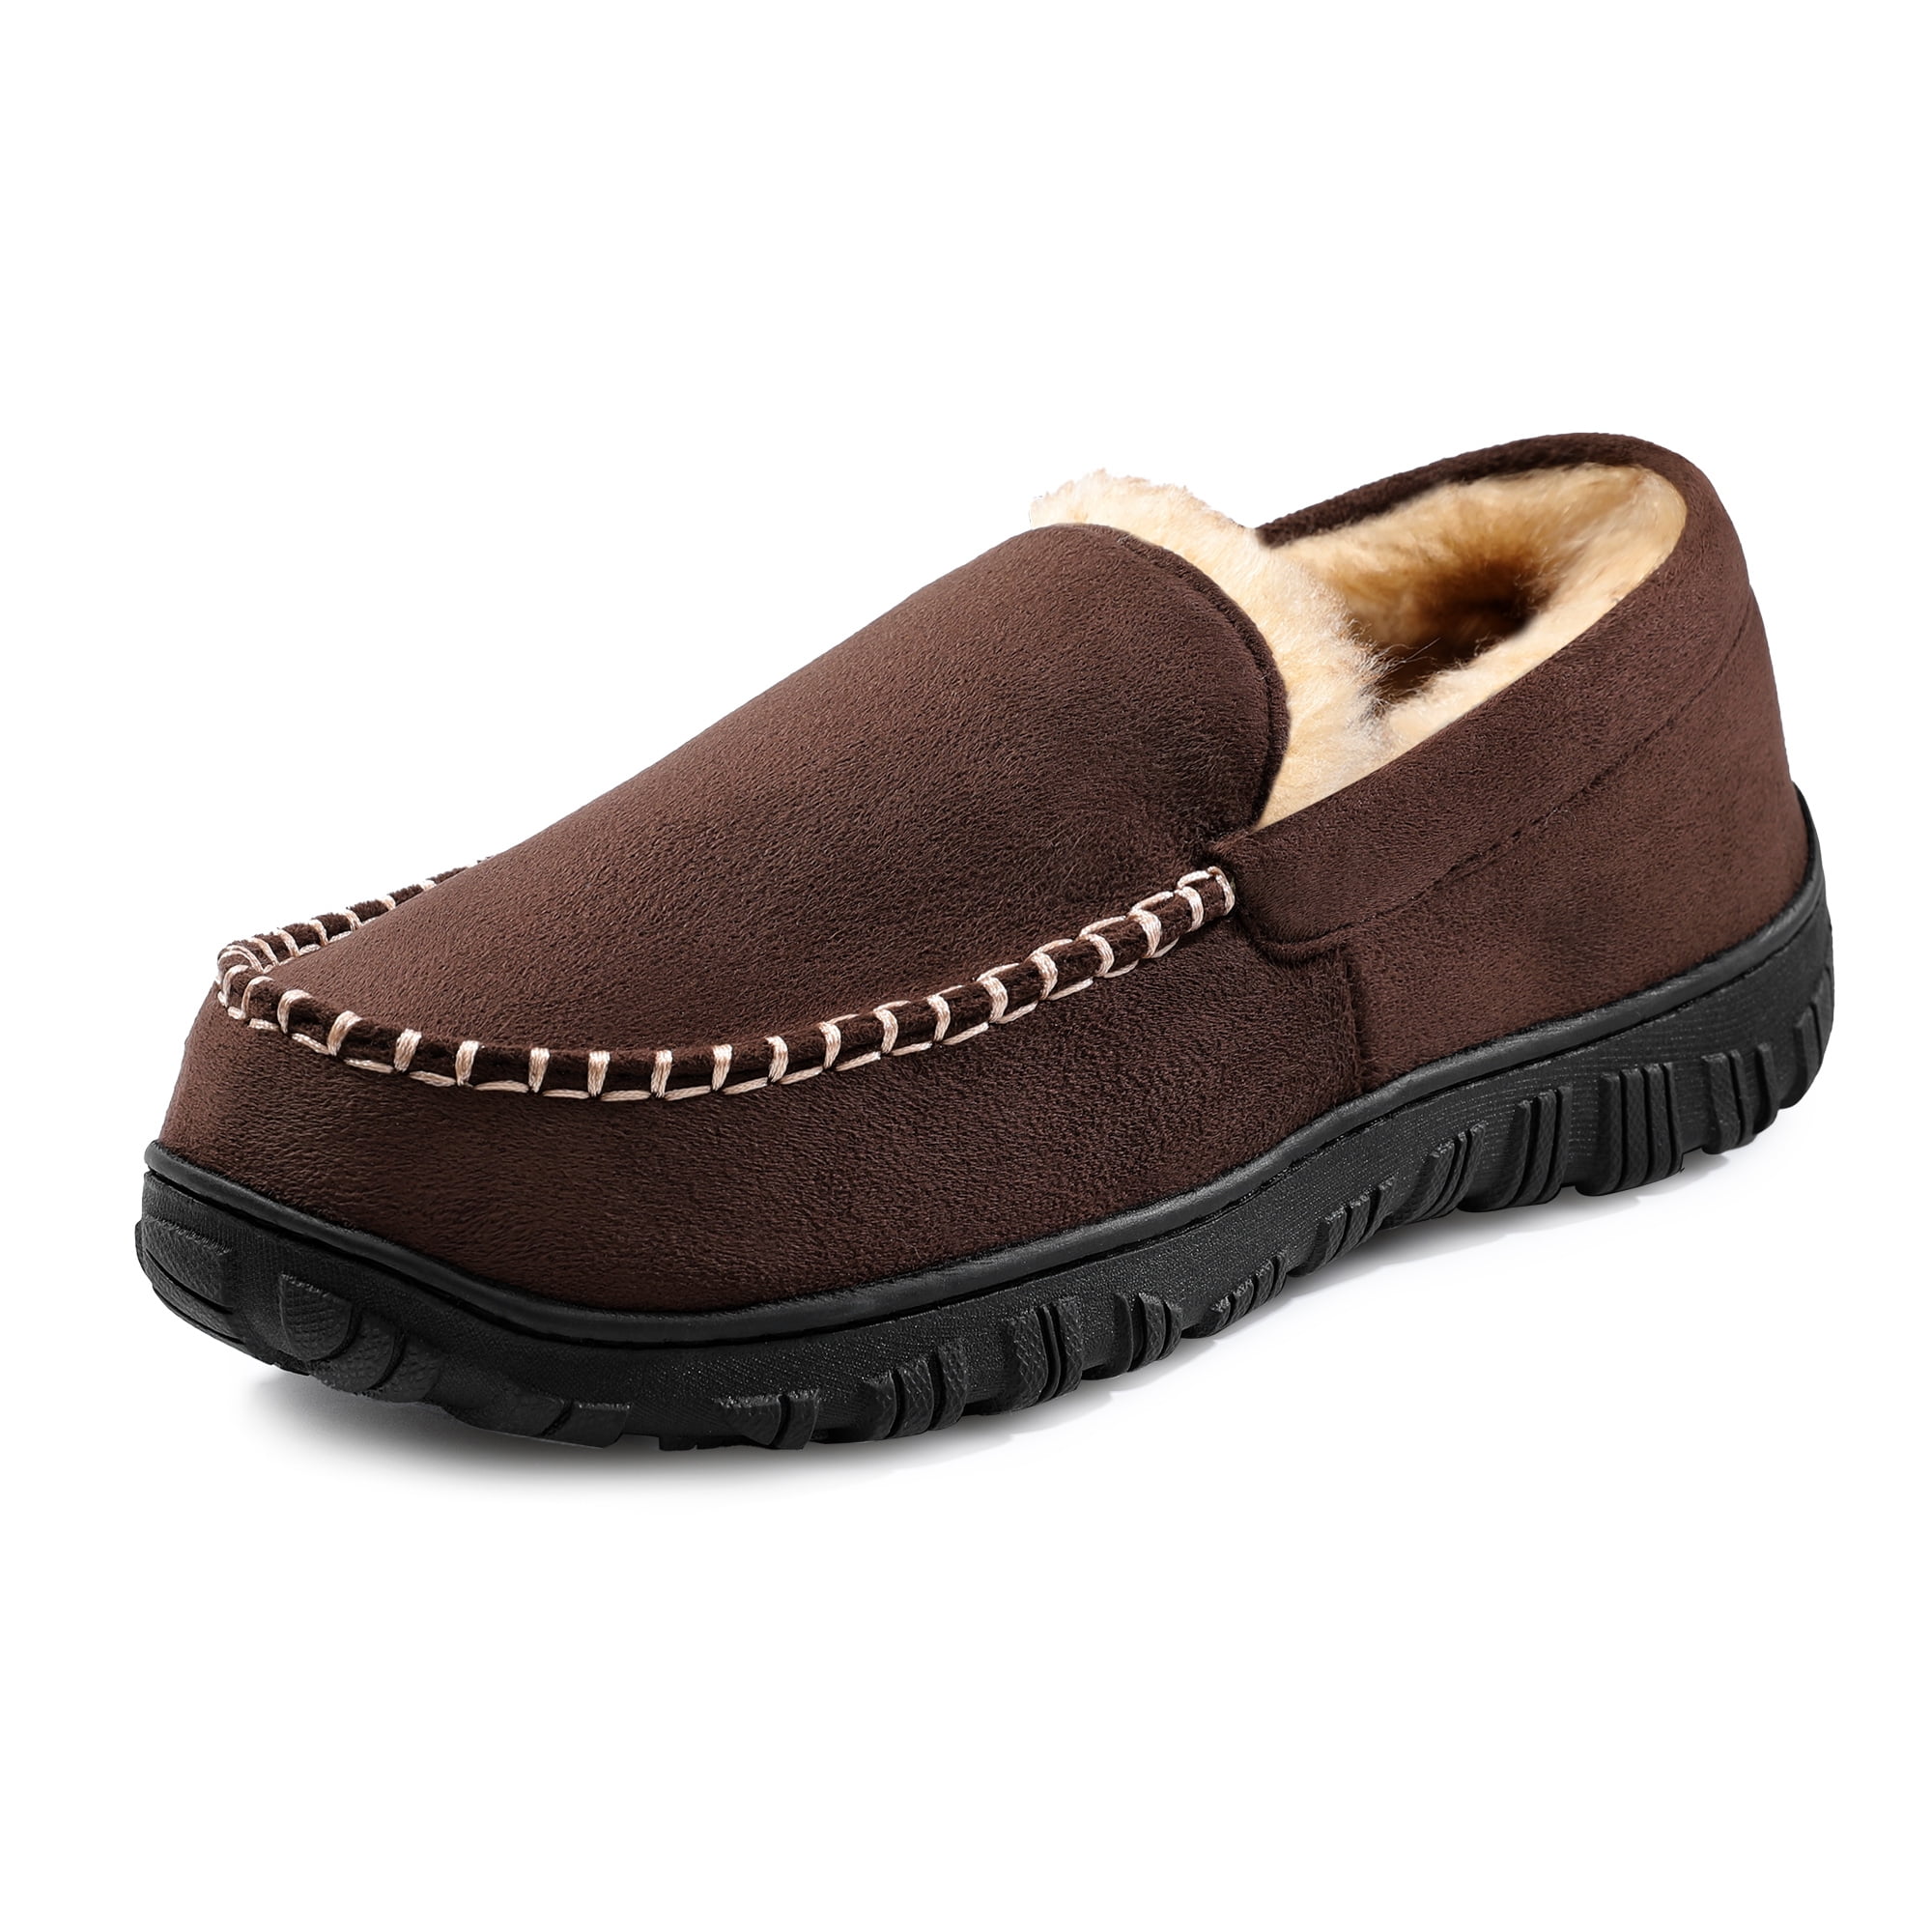 HOMEHOT Men's Slippers Mens Moccasin Slippers Memory Foam House Shoes ...